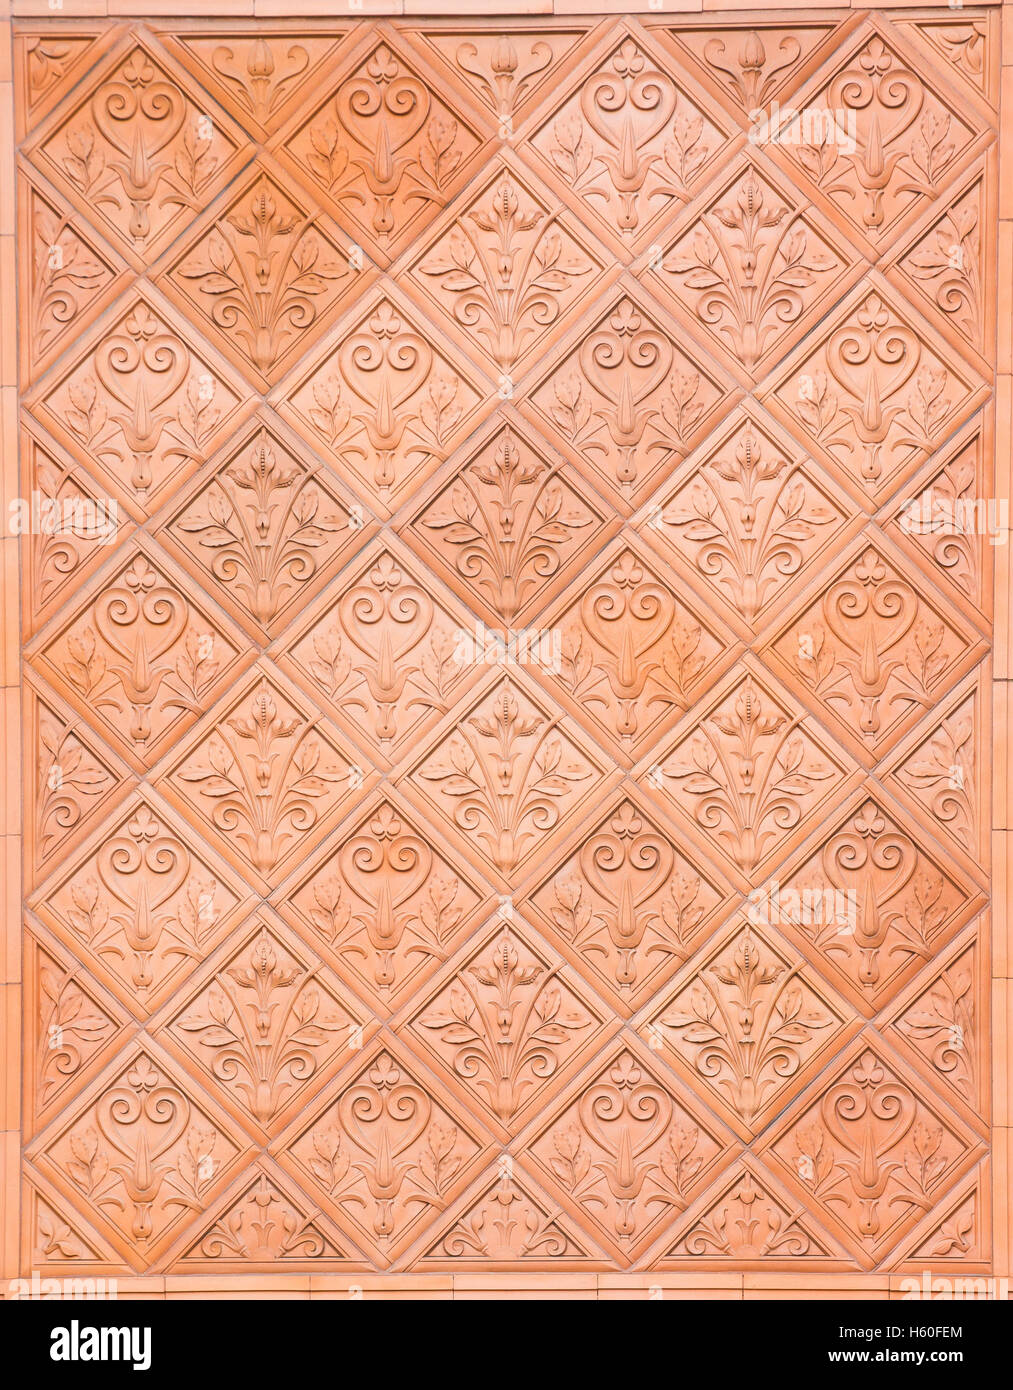 Closeup of terracotta stone with a repeating pattern Stock Photo